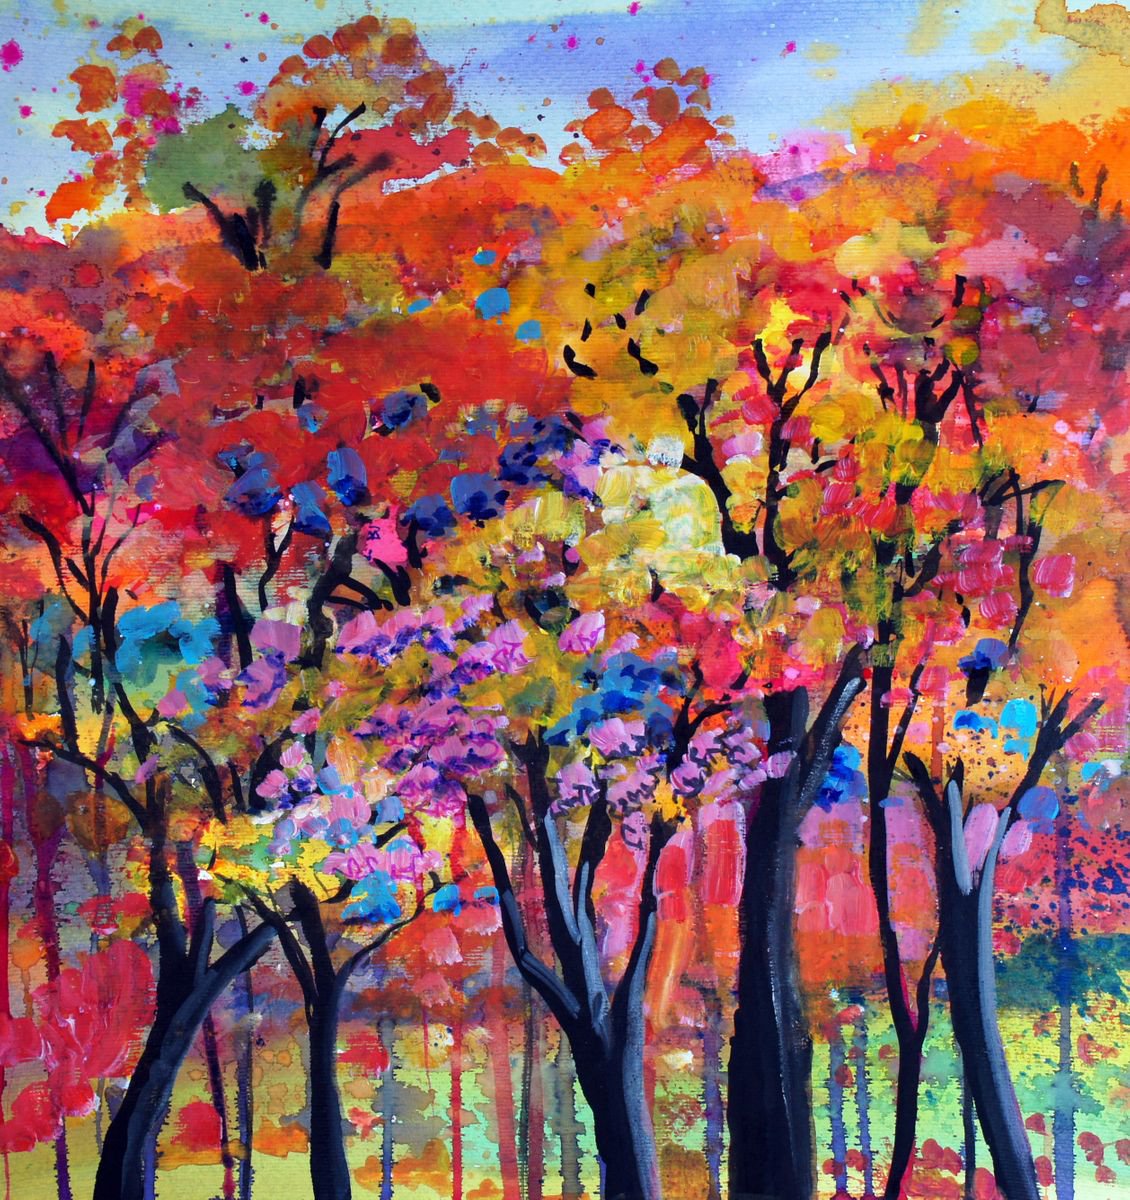 Autumn Day by Julia Rigby